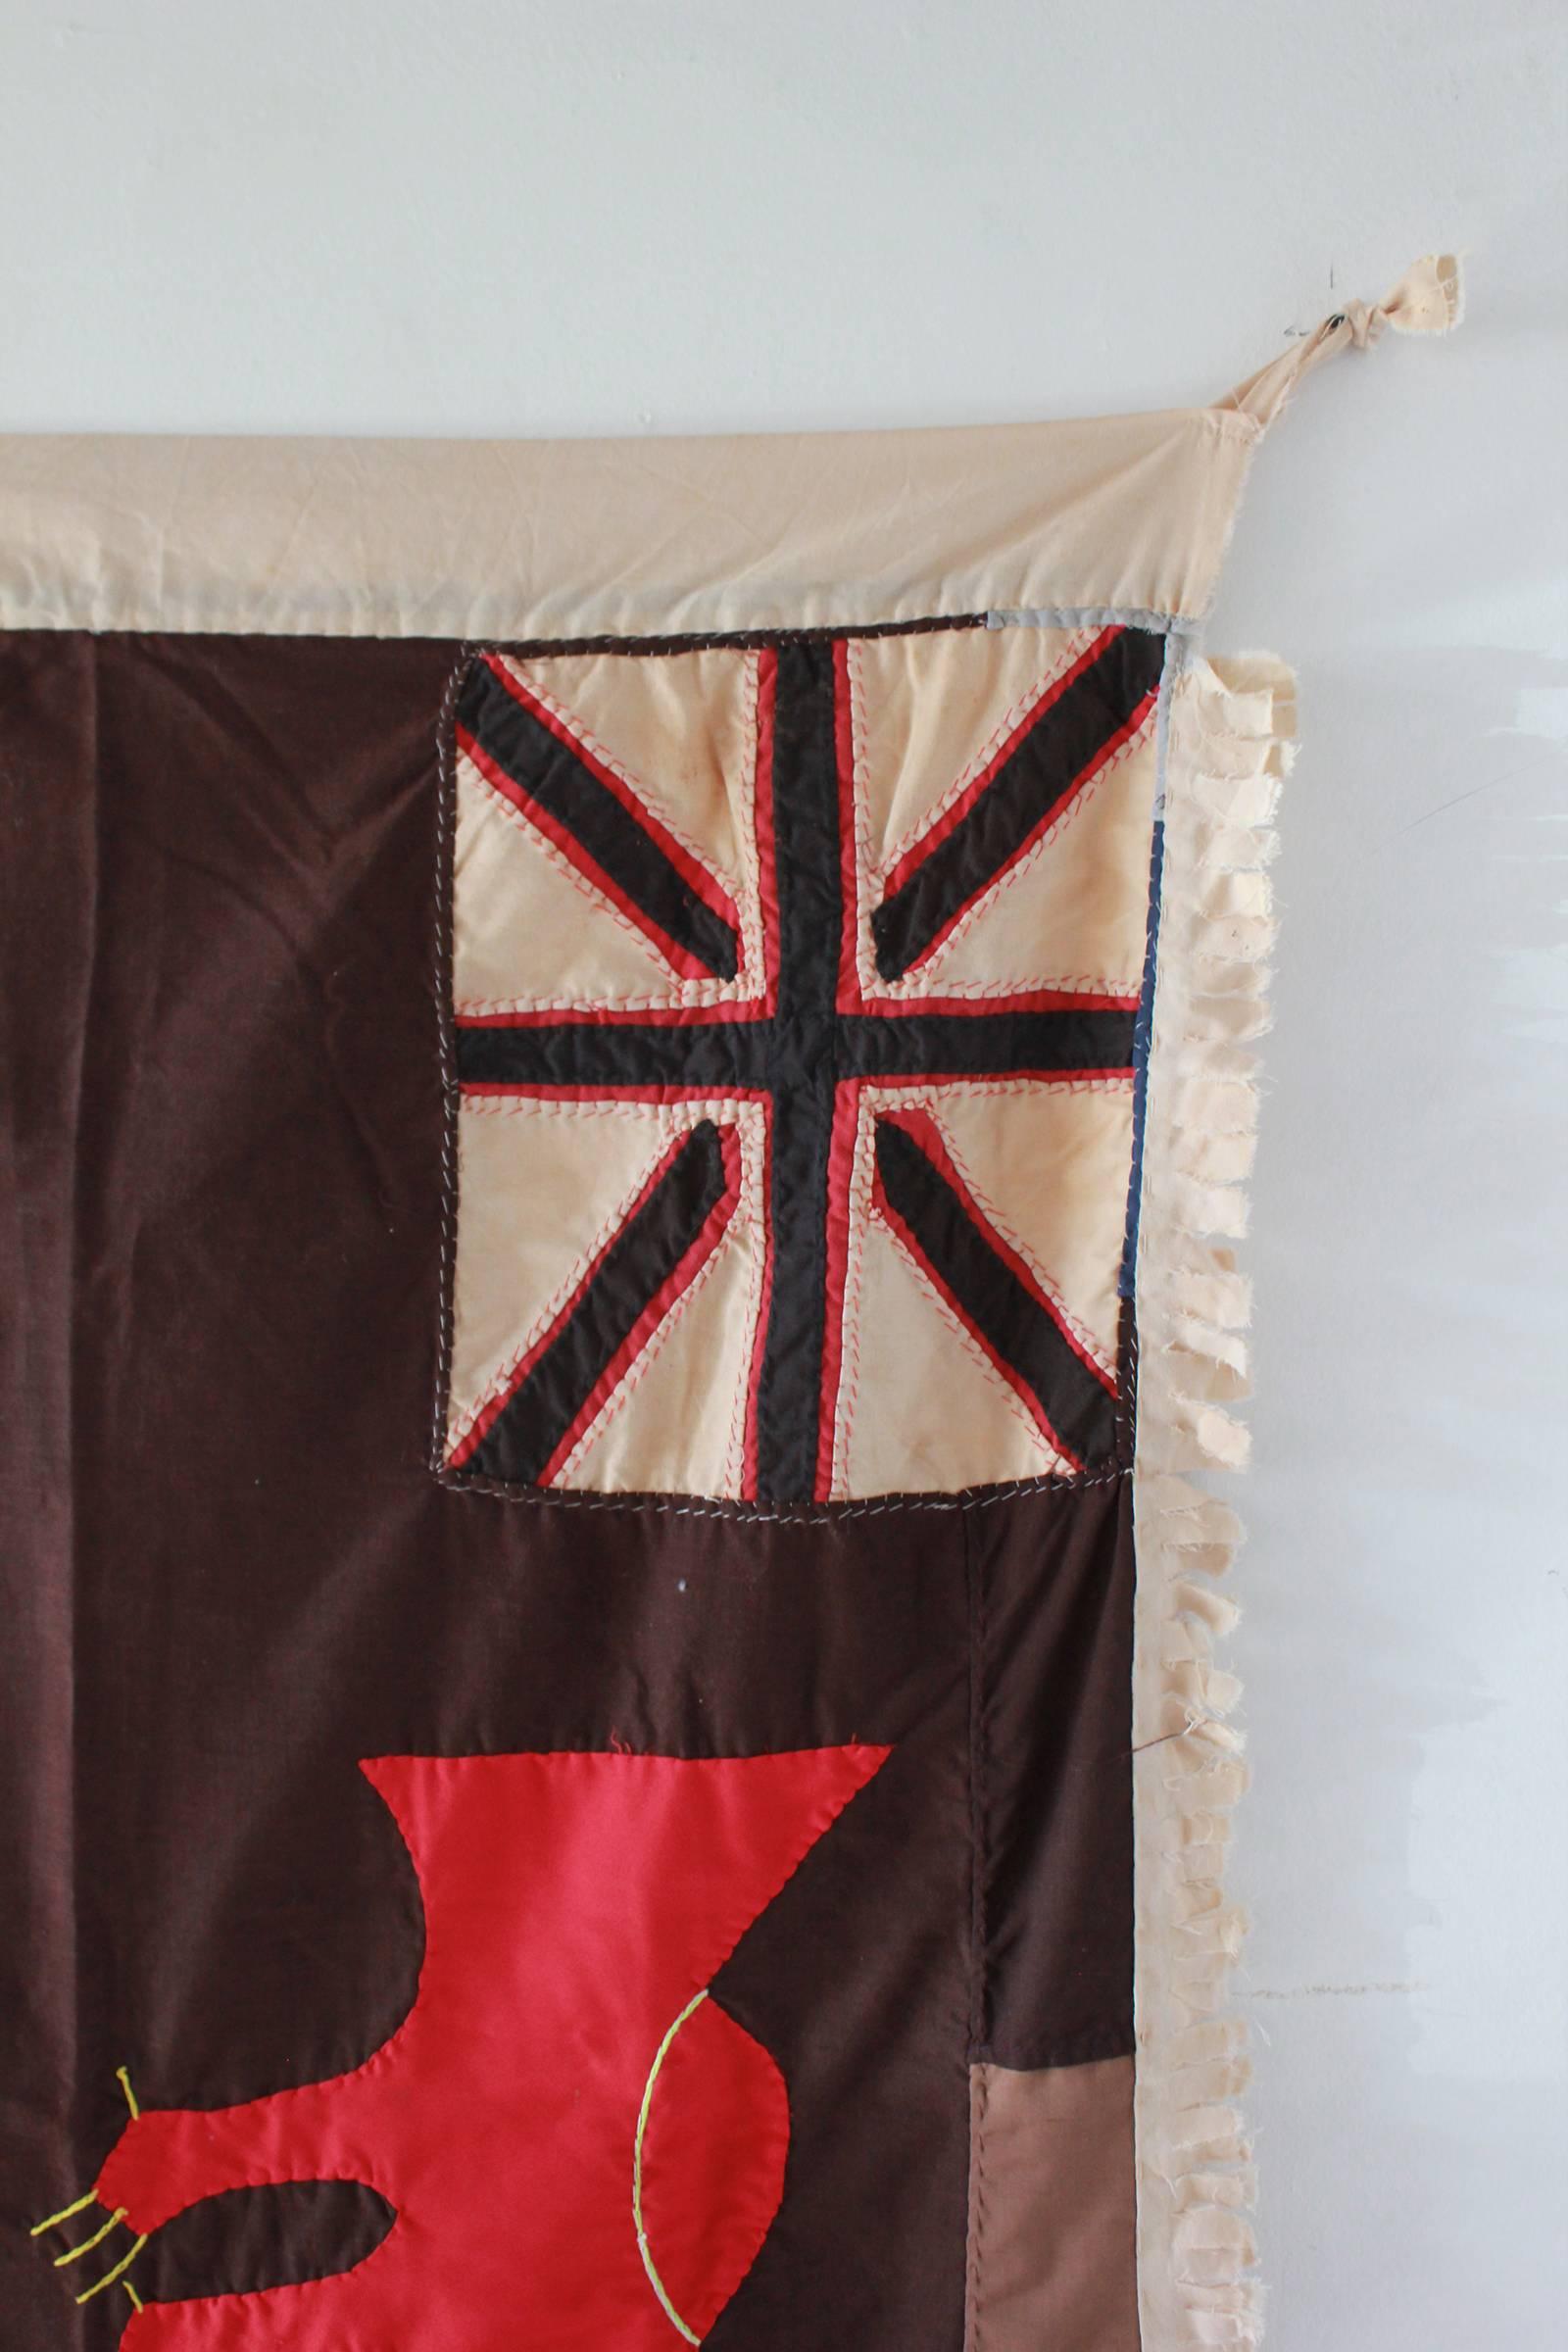 Fante flags represent the merger of two cultural traditions, the Akan tradition of combining proverbs with visual imagery, and the European heraldic tradition, which used flags and banners displaying royal arms in regimental colors.